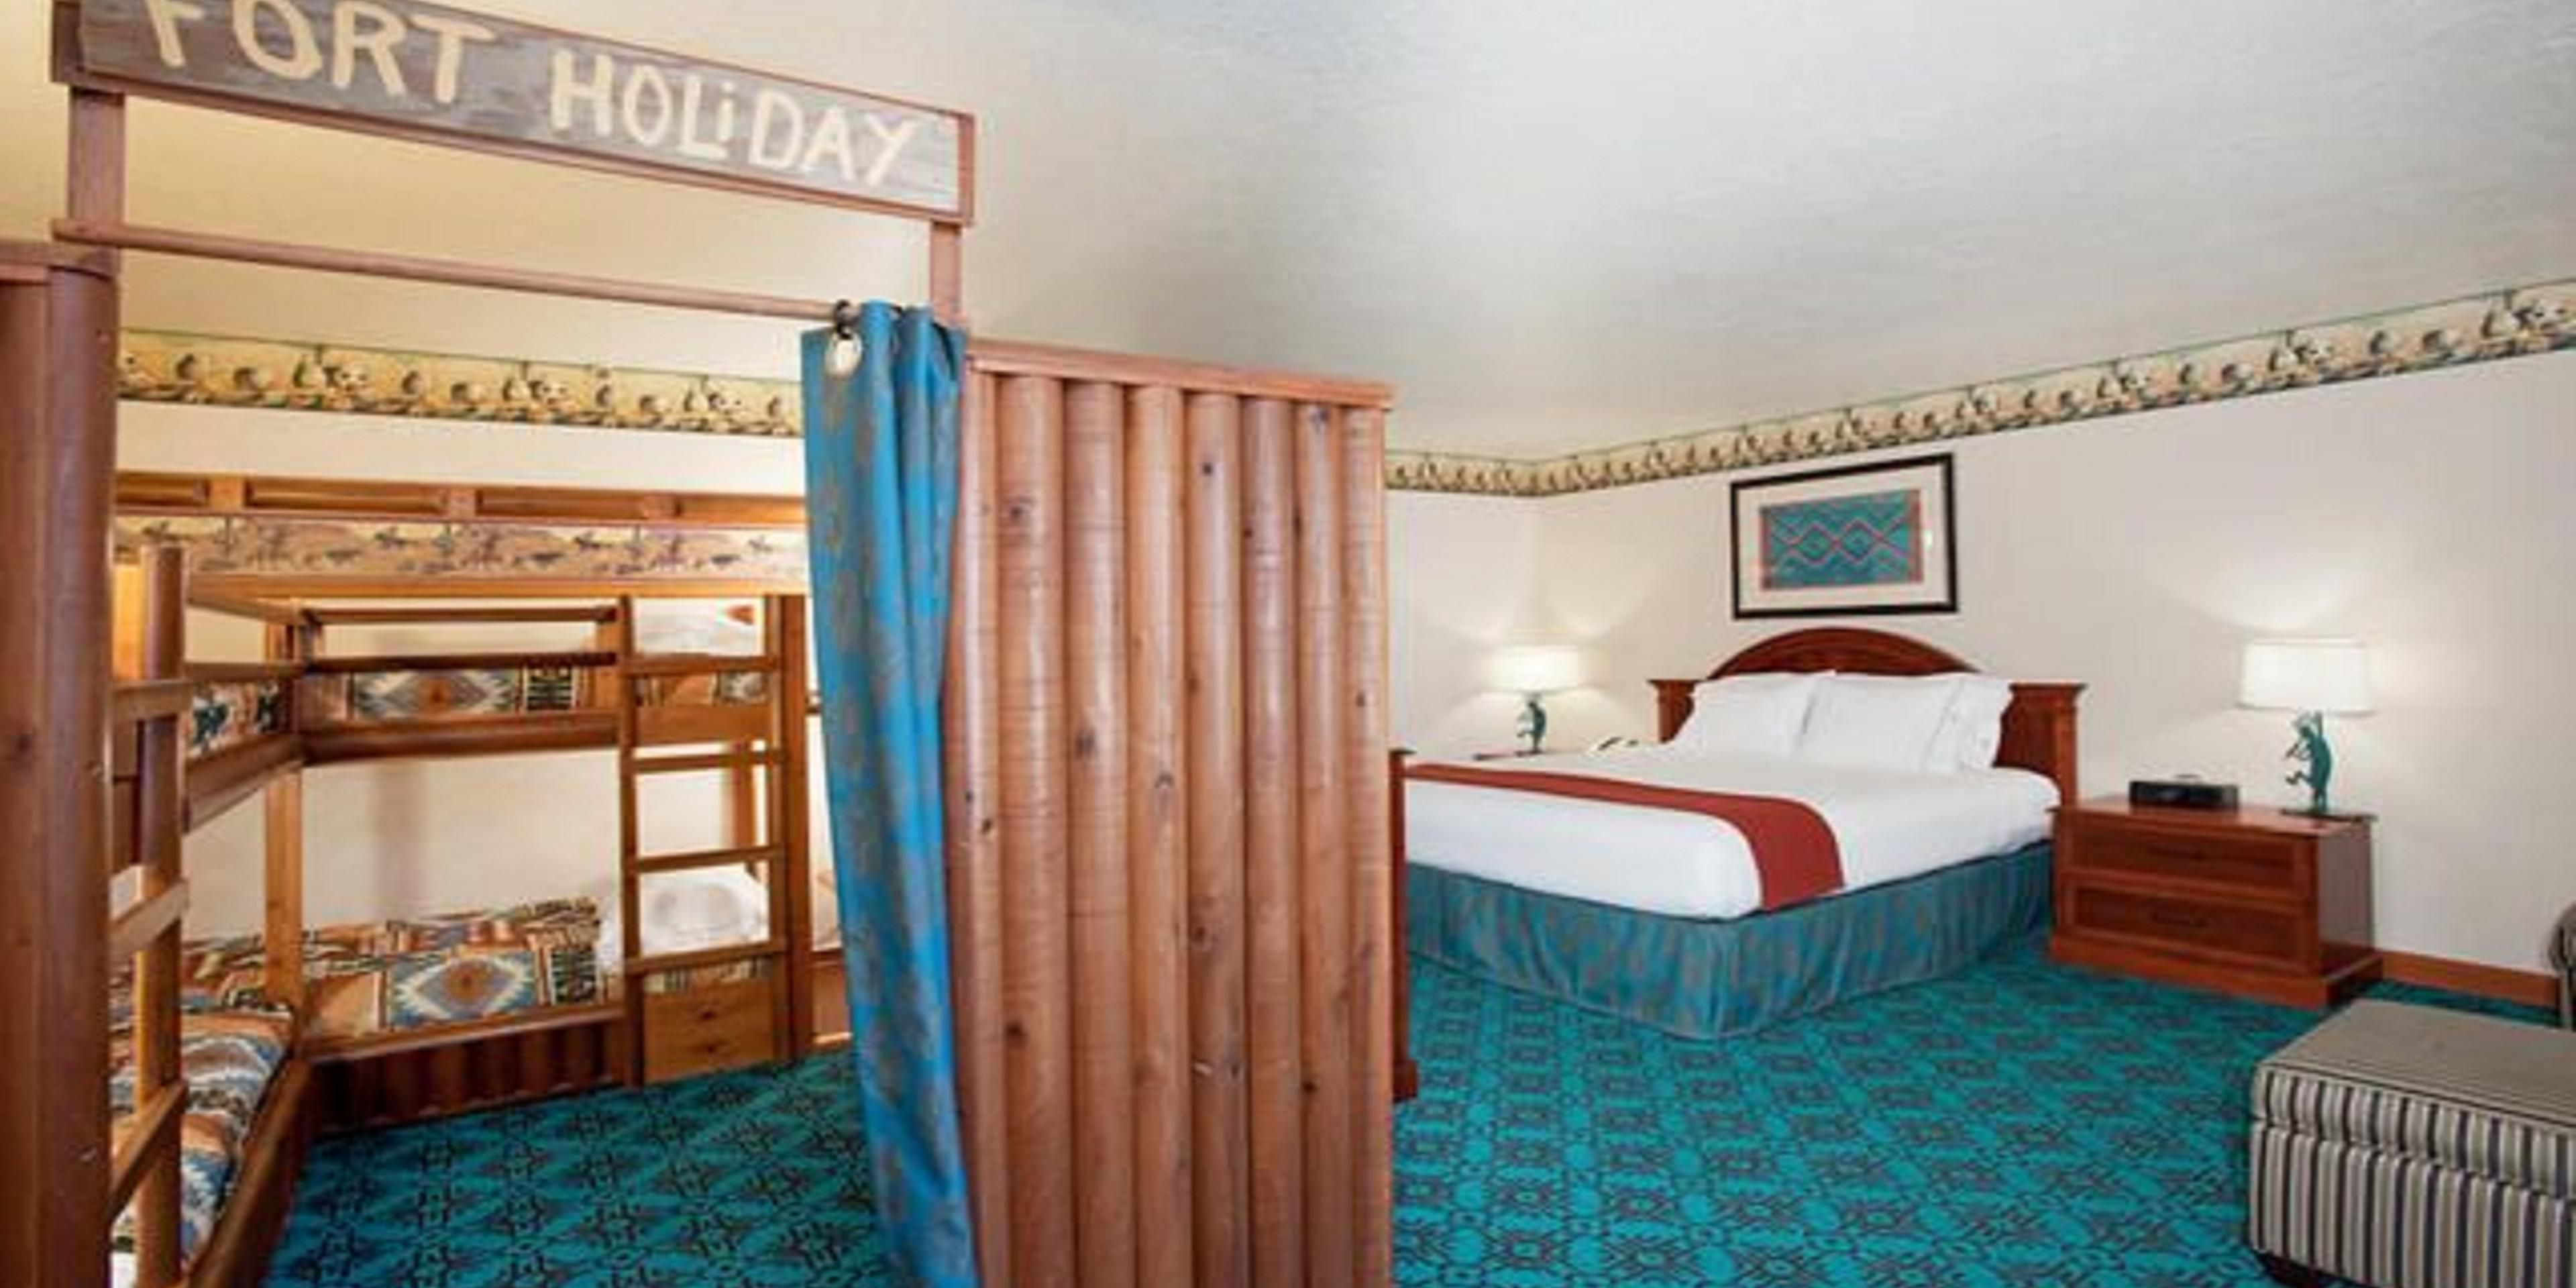 Our King Kids Suite is fun and comfortable for all. Relax while the kids play, modeled after an old west fort, there is two sets of junior bunk beds and a Play Station 3 included for the kids entertainment. 